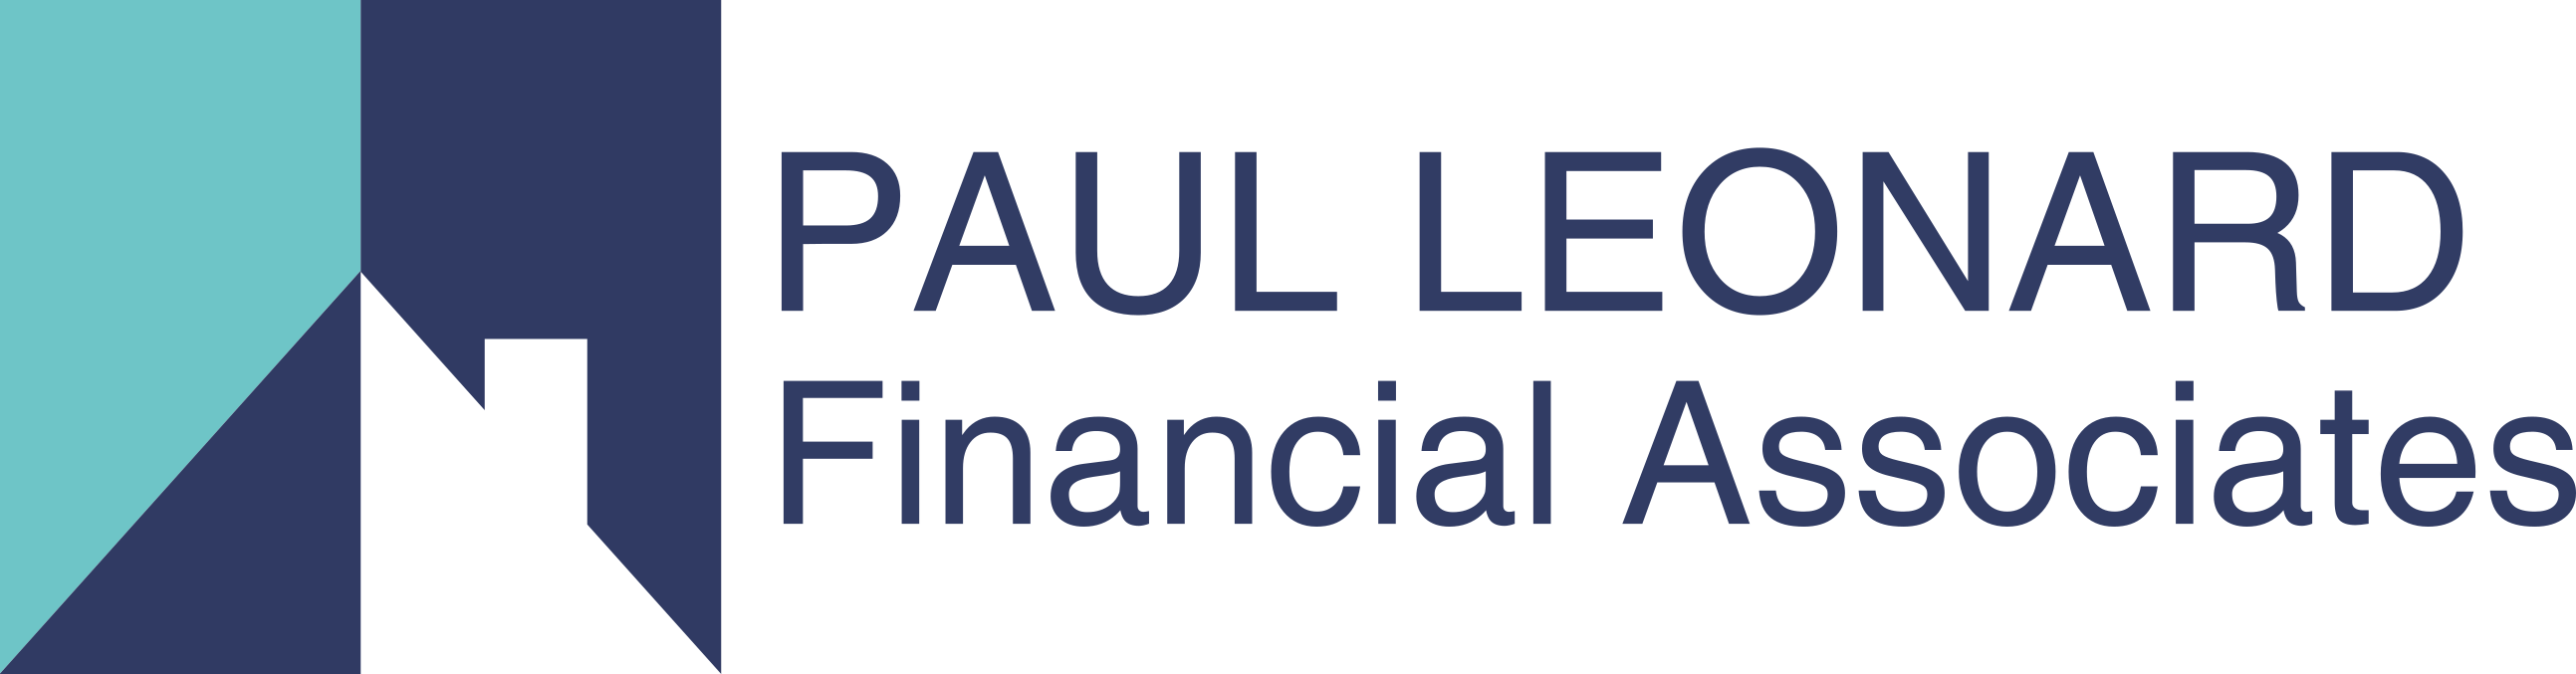 Logo of Paul Leonard Financial Associates - The Equity Release Specialists Financial Consultants In Buntingford, Hertfordshire